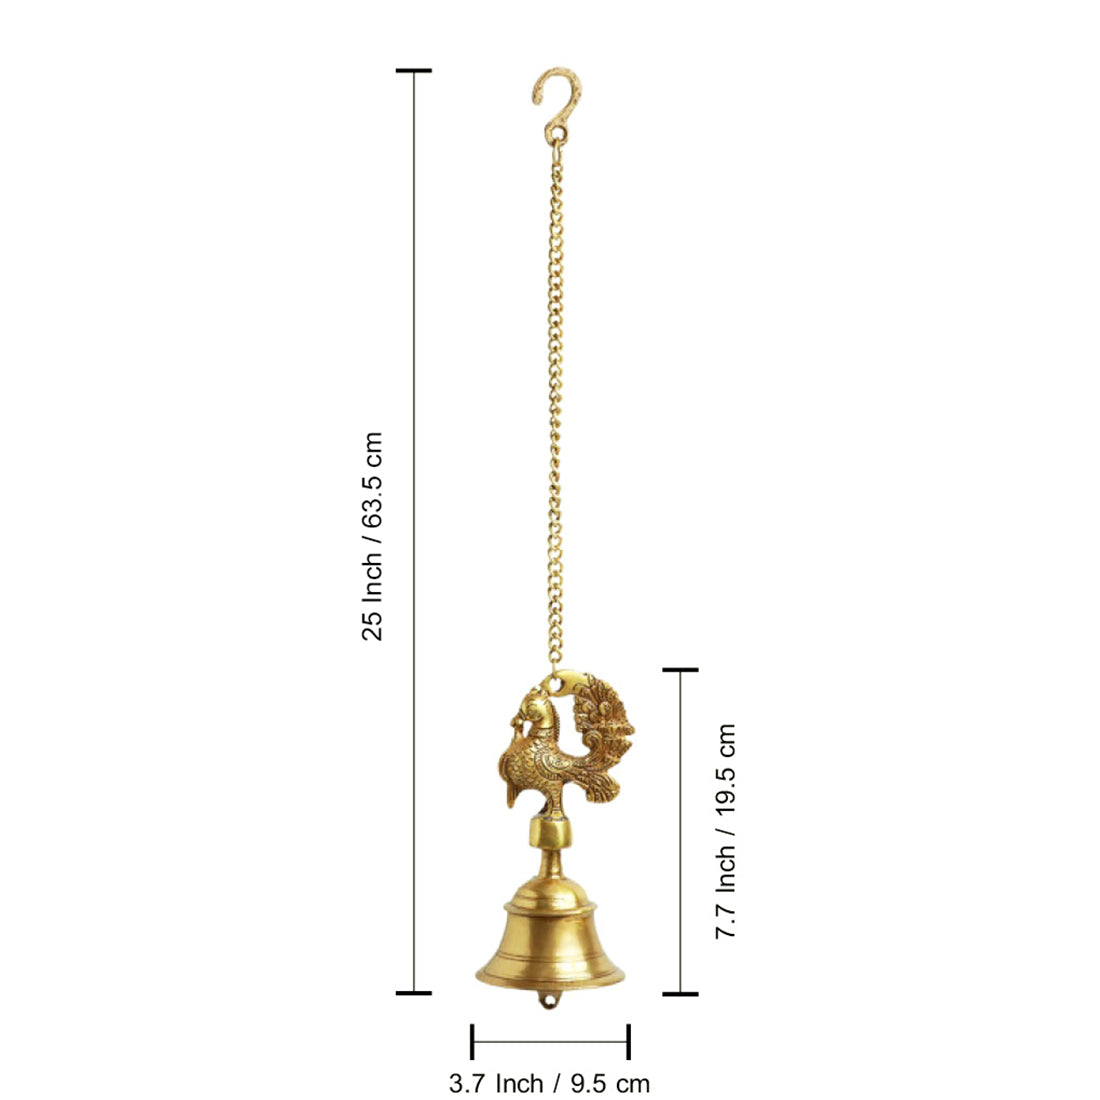 'Elegant Peacock' Hand-Etched Decorative Hanging Bell In Brass